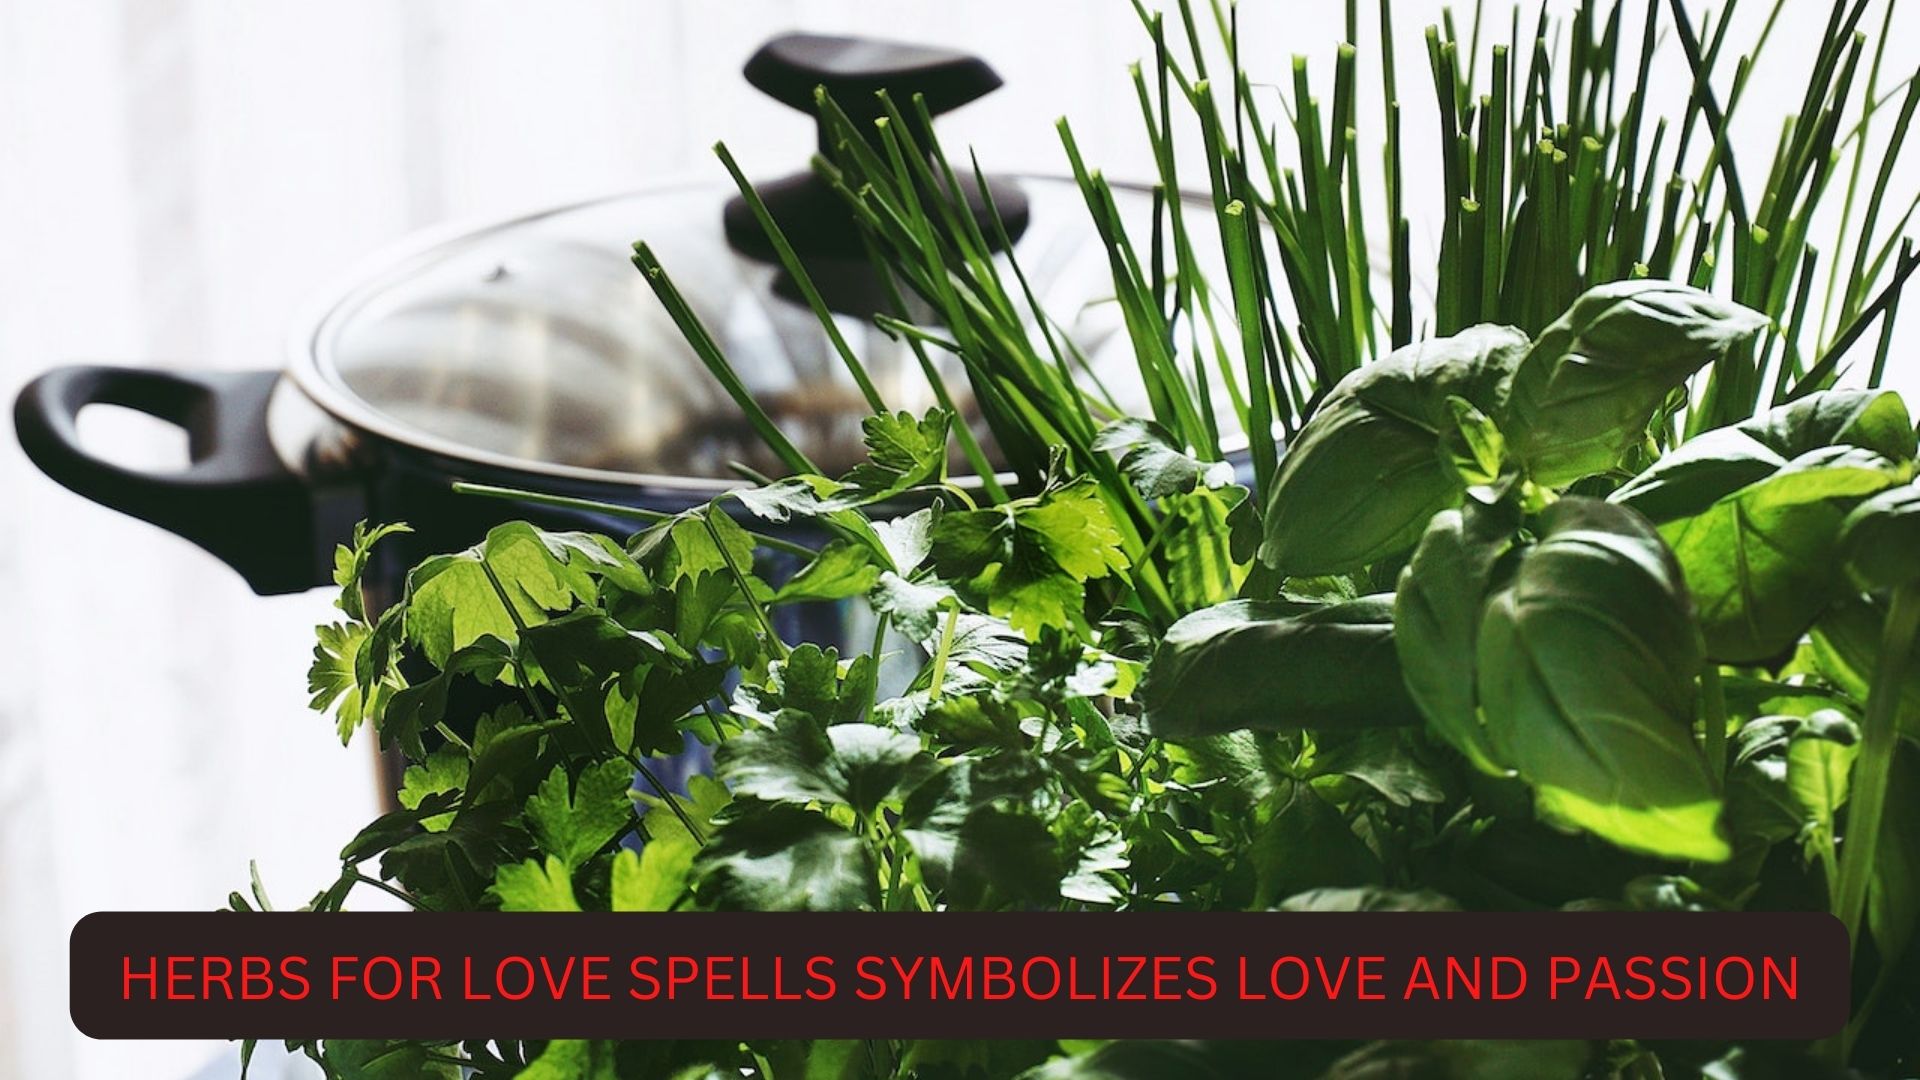 Herbs For Love Spells Symbolism - Love And Passion